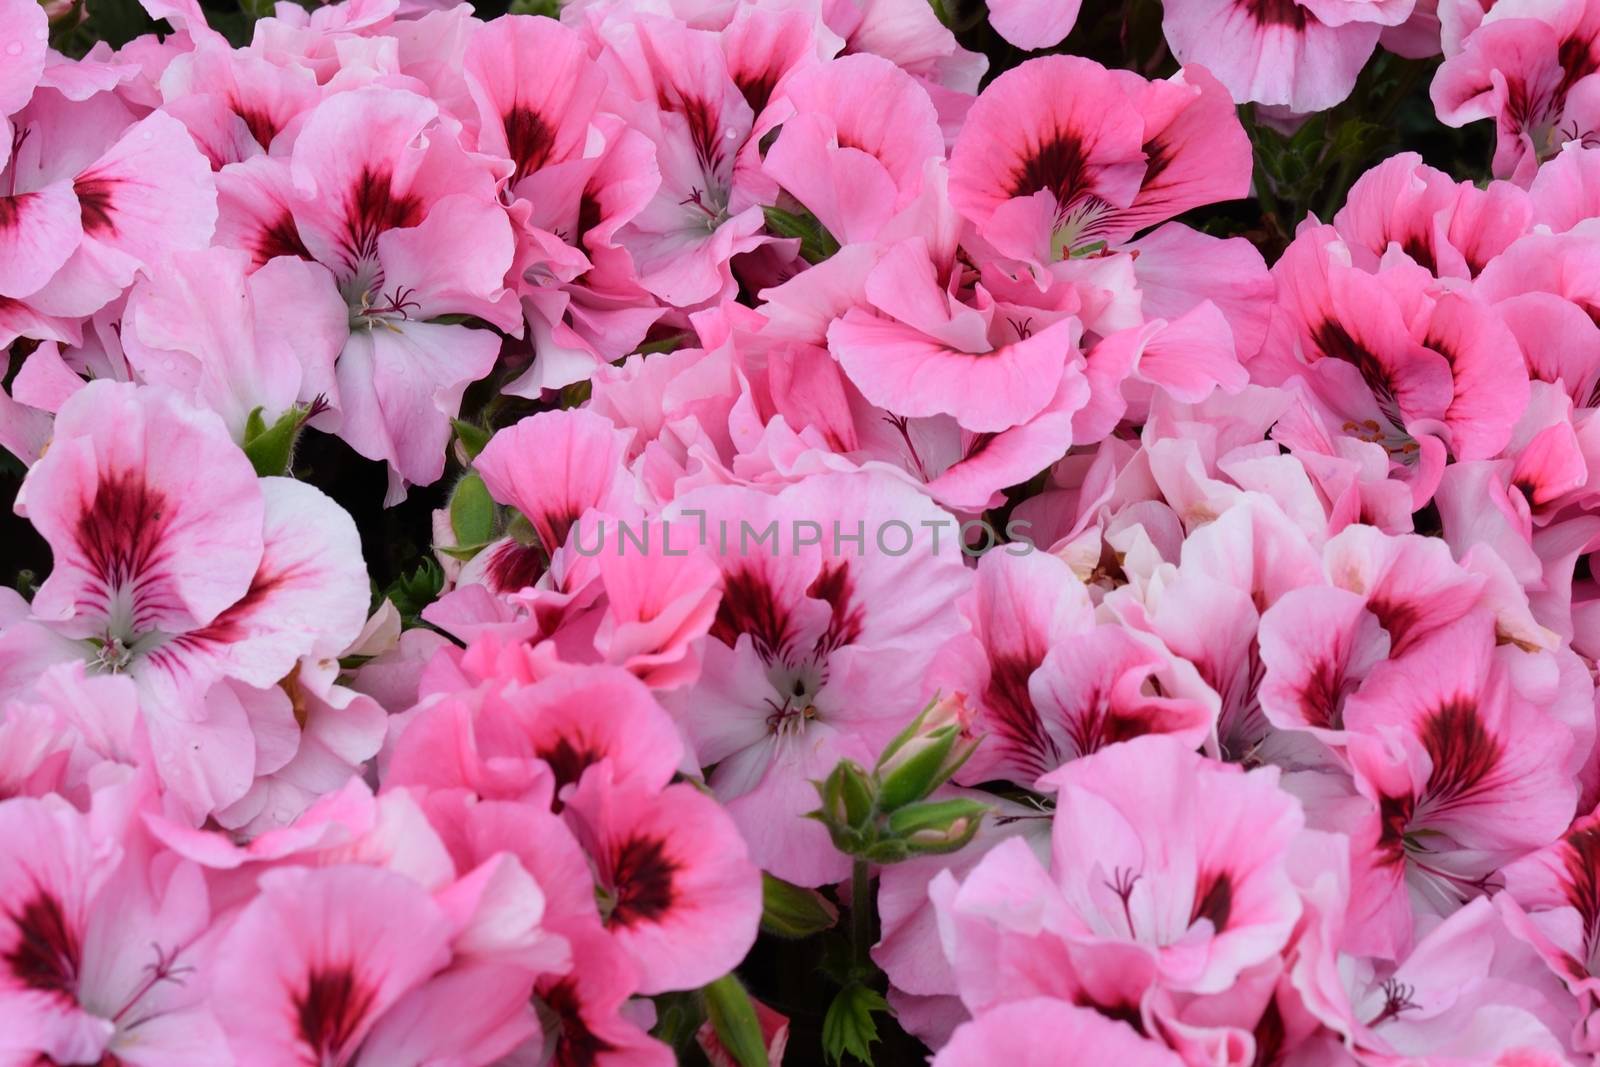 Mass of Bright pink flowers